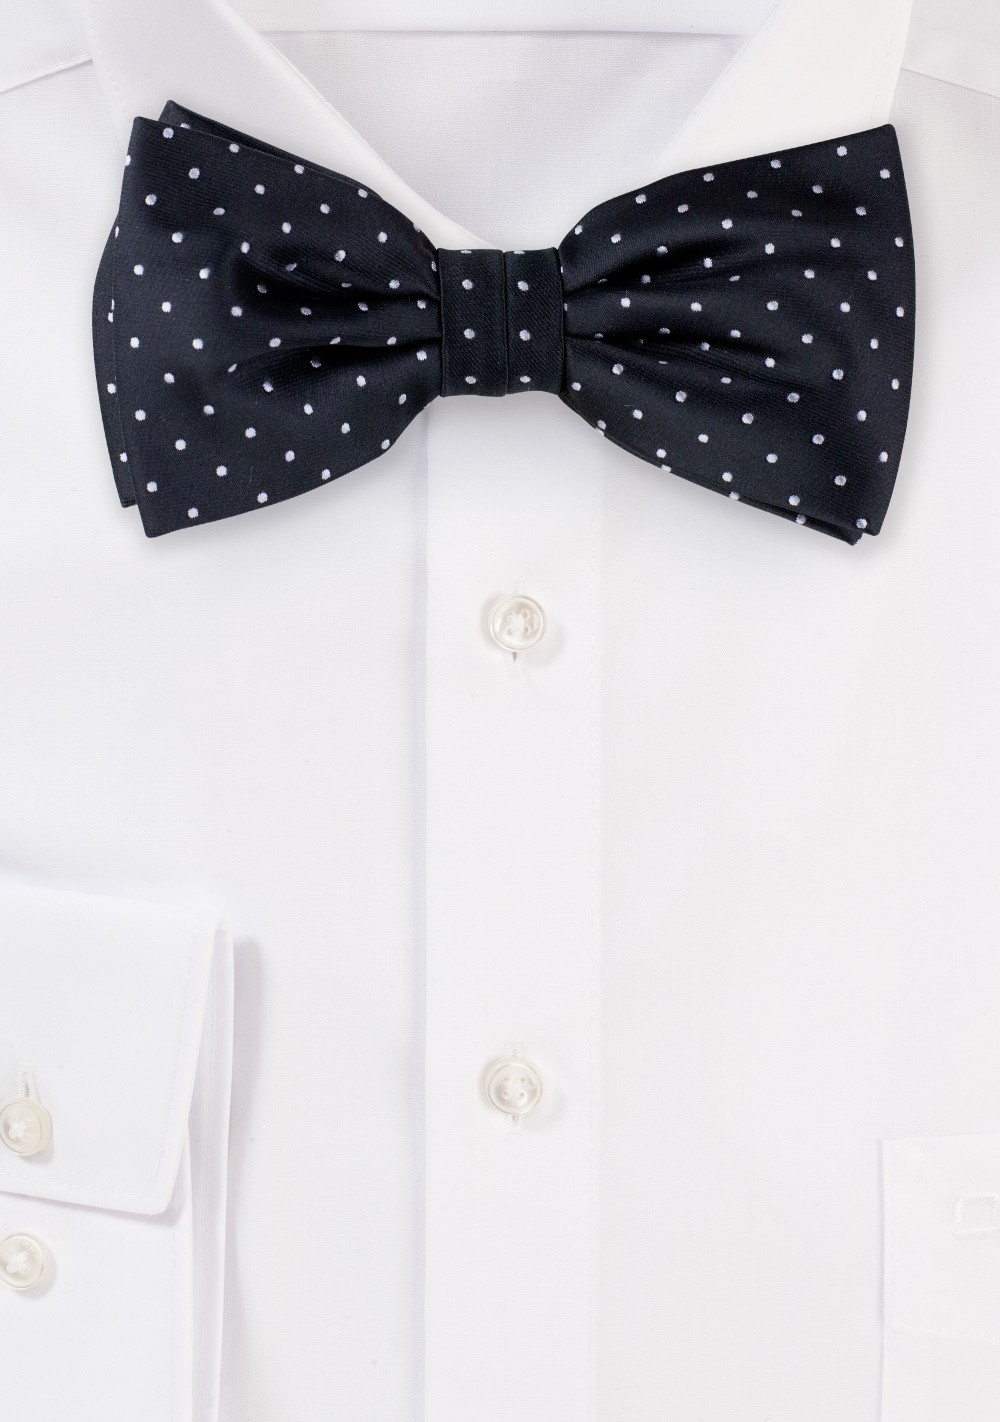 Black and Silver Polka Dot Bow Tie